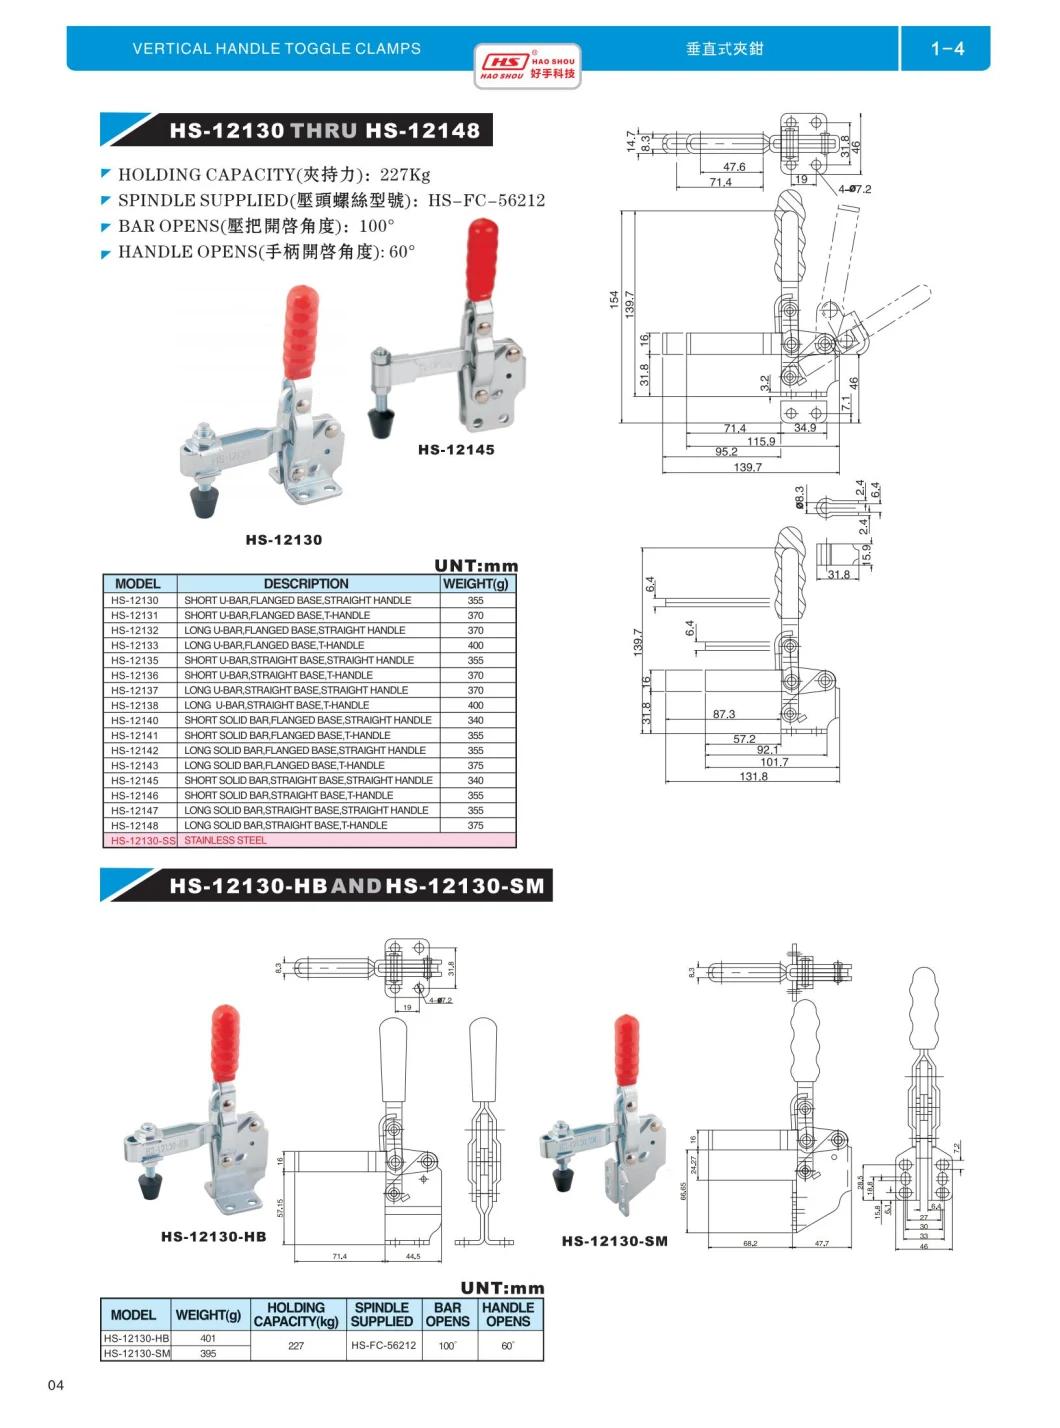 HS-12142 Release Woodworking Clamps Hold Down Quick Release 207-L Vertical Adjustable Toggle Clamp